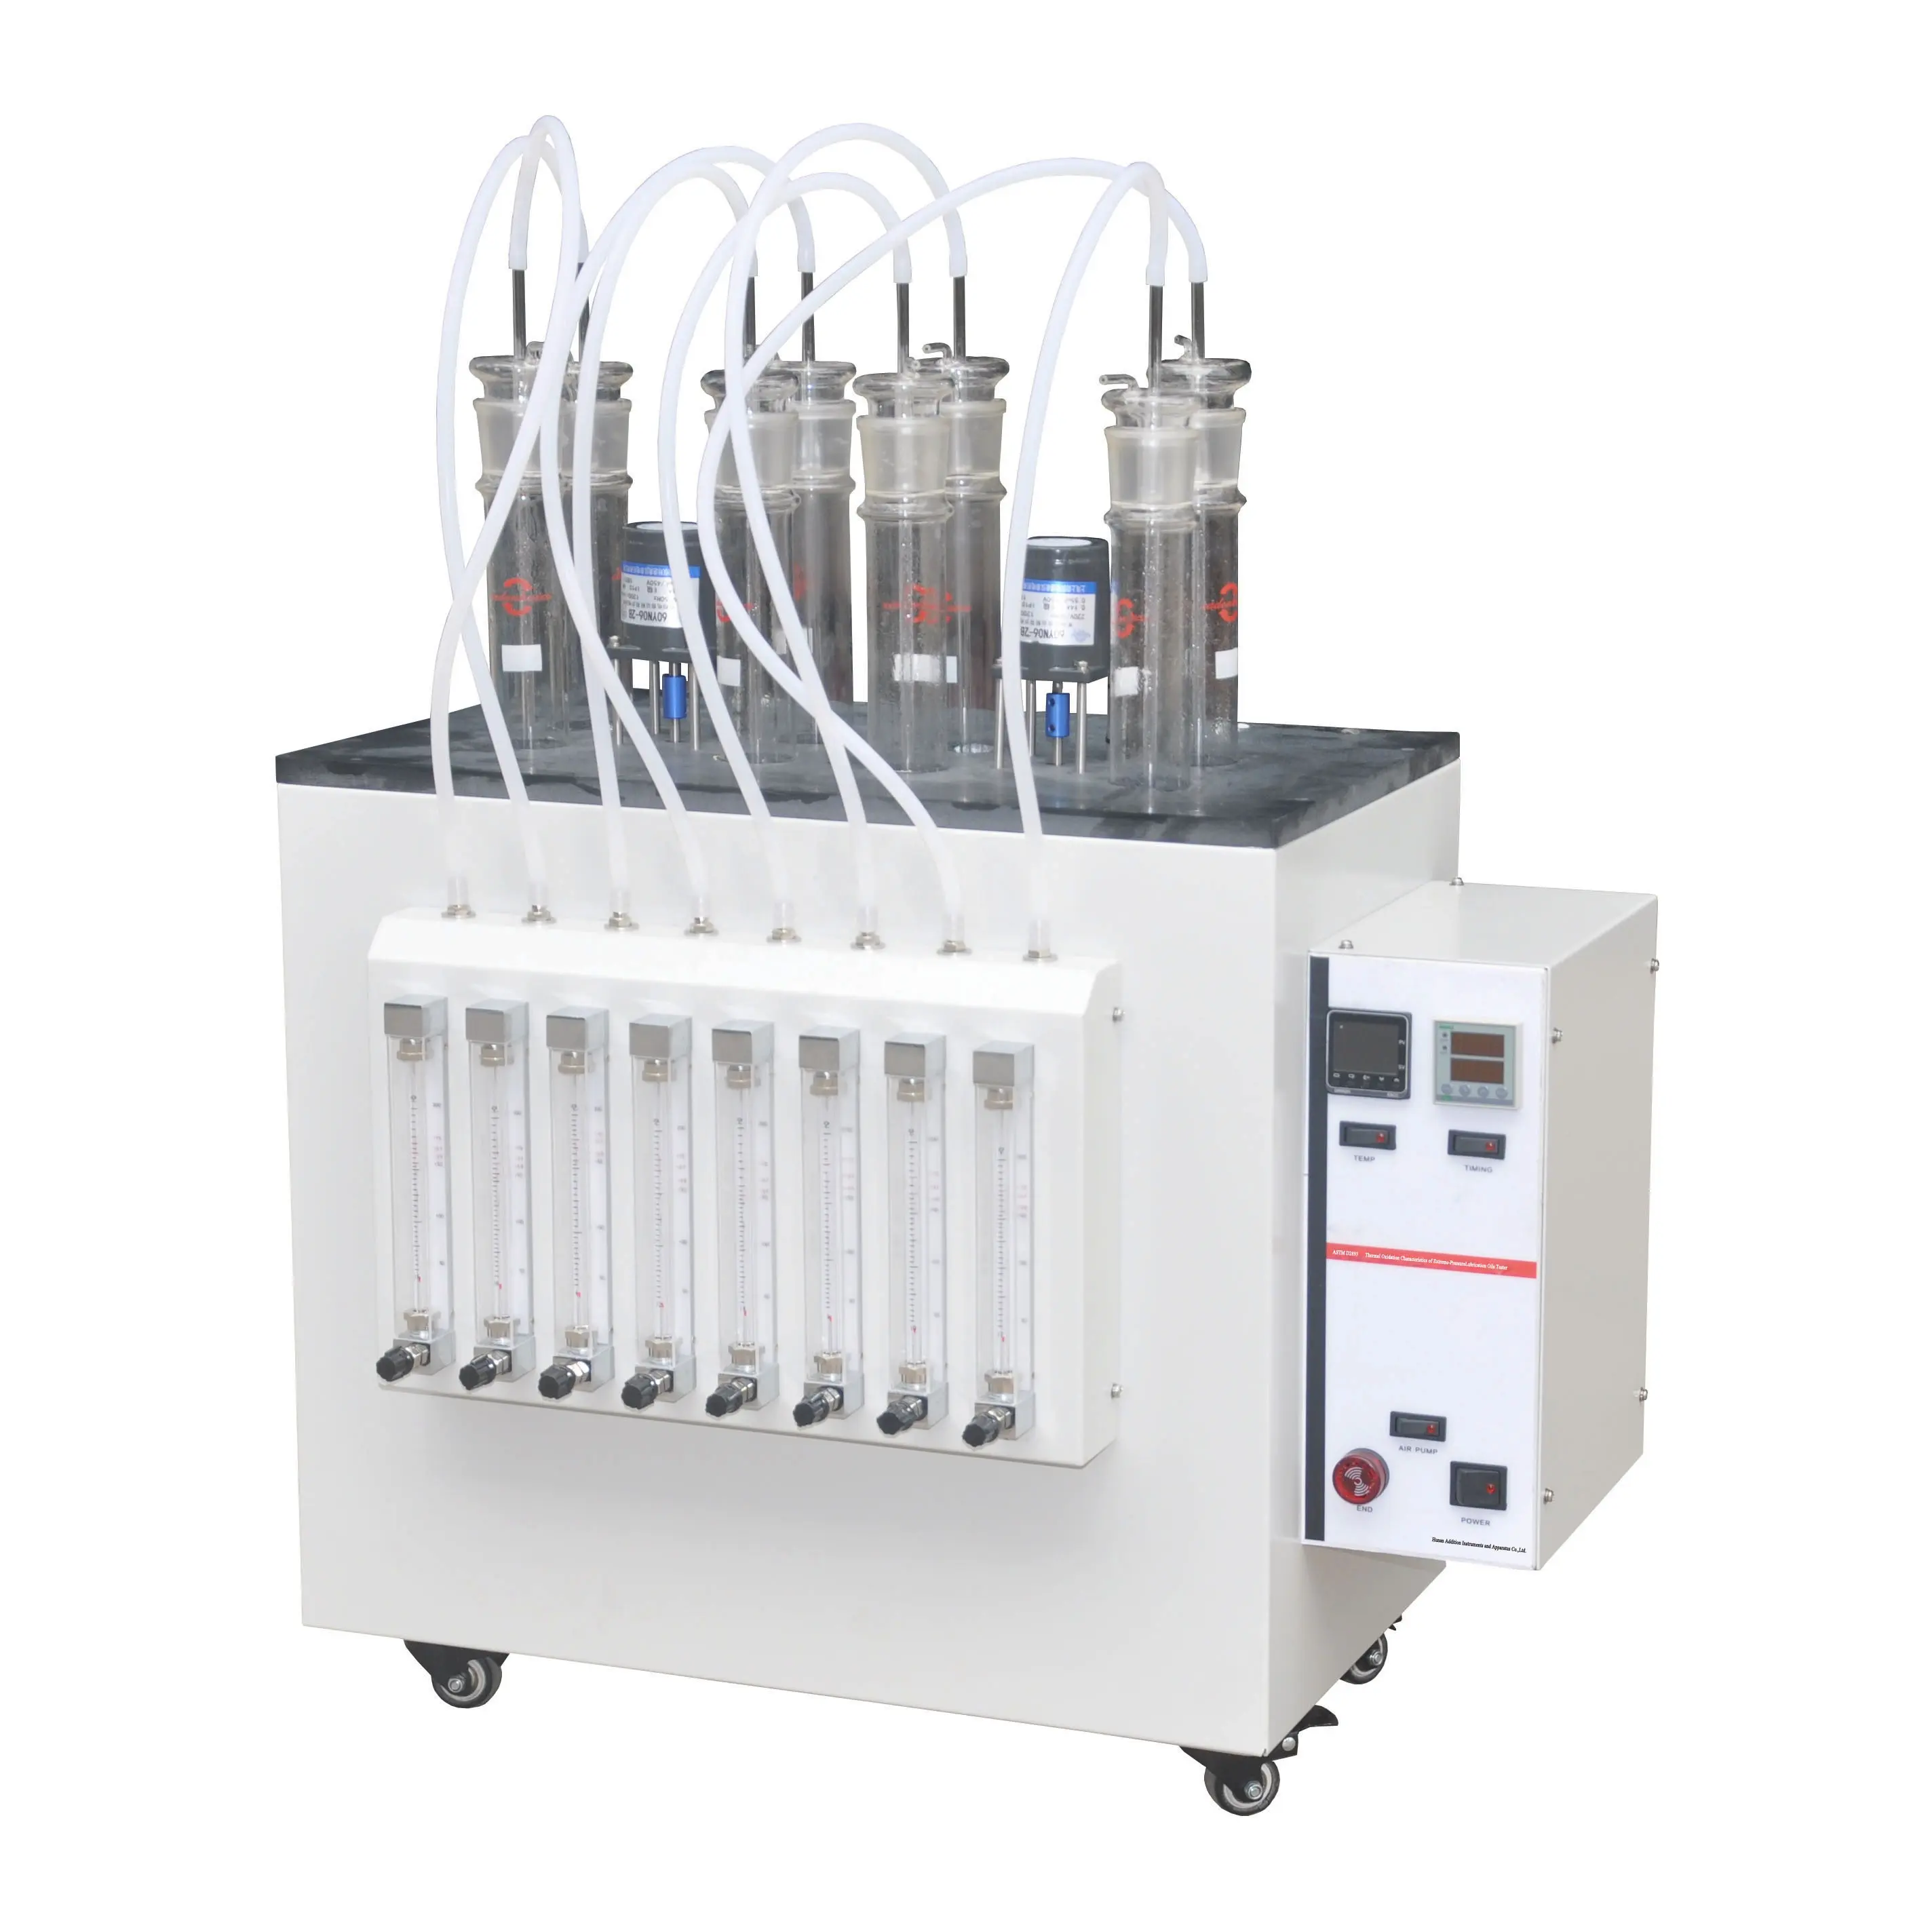 ASTM D2893 Thermal Oxidation Characteristics of Extreme-Pressure Lubrication Oils Tester heat oxidation analyzer